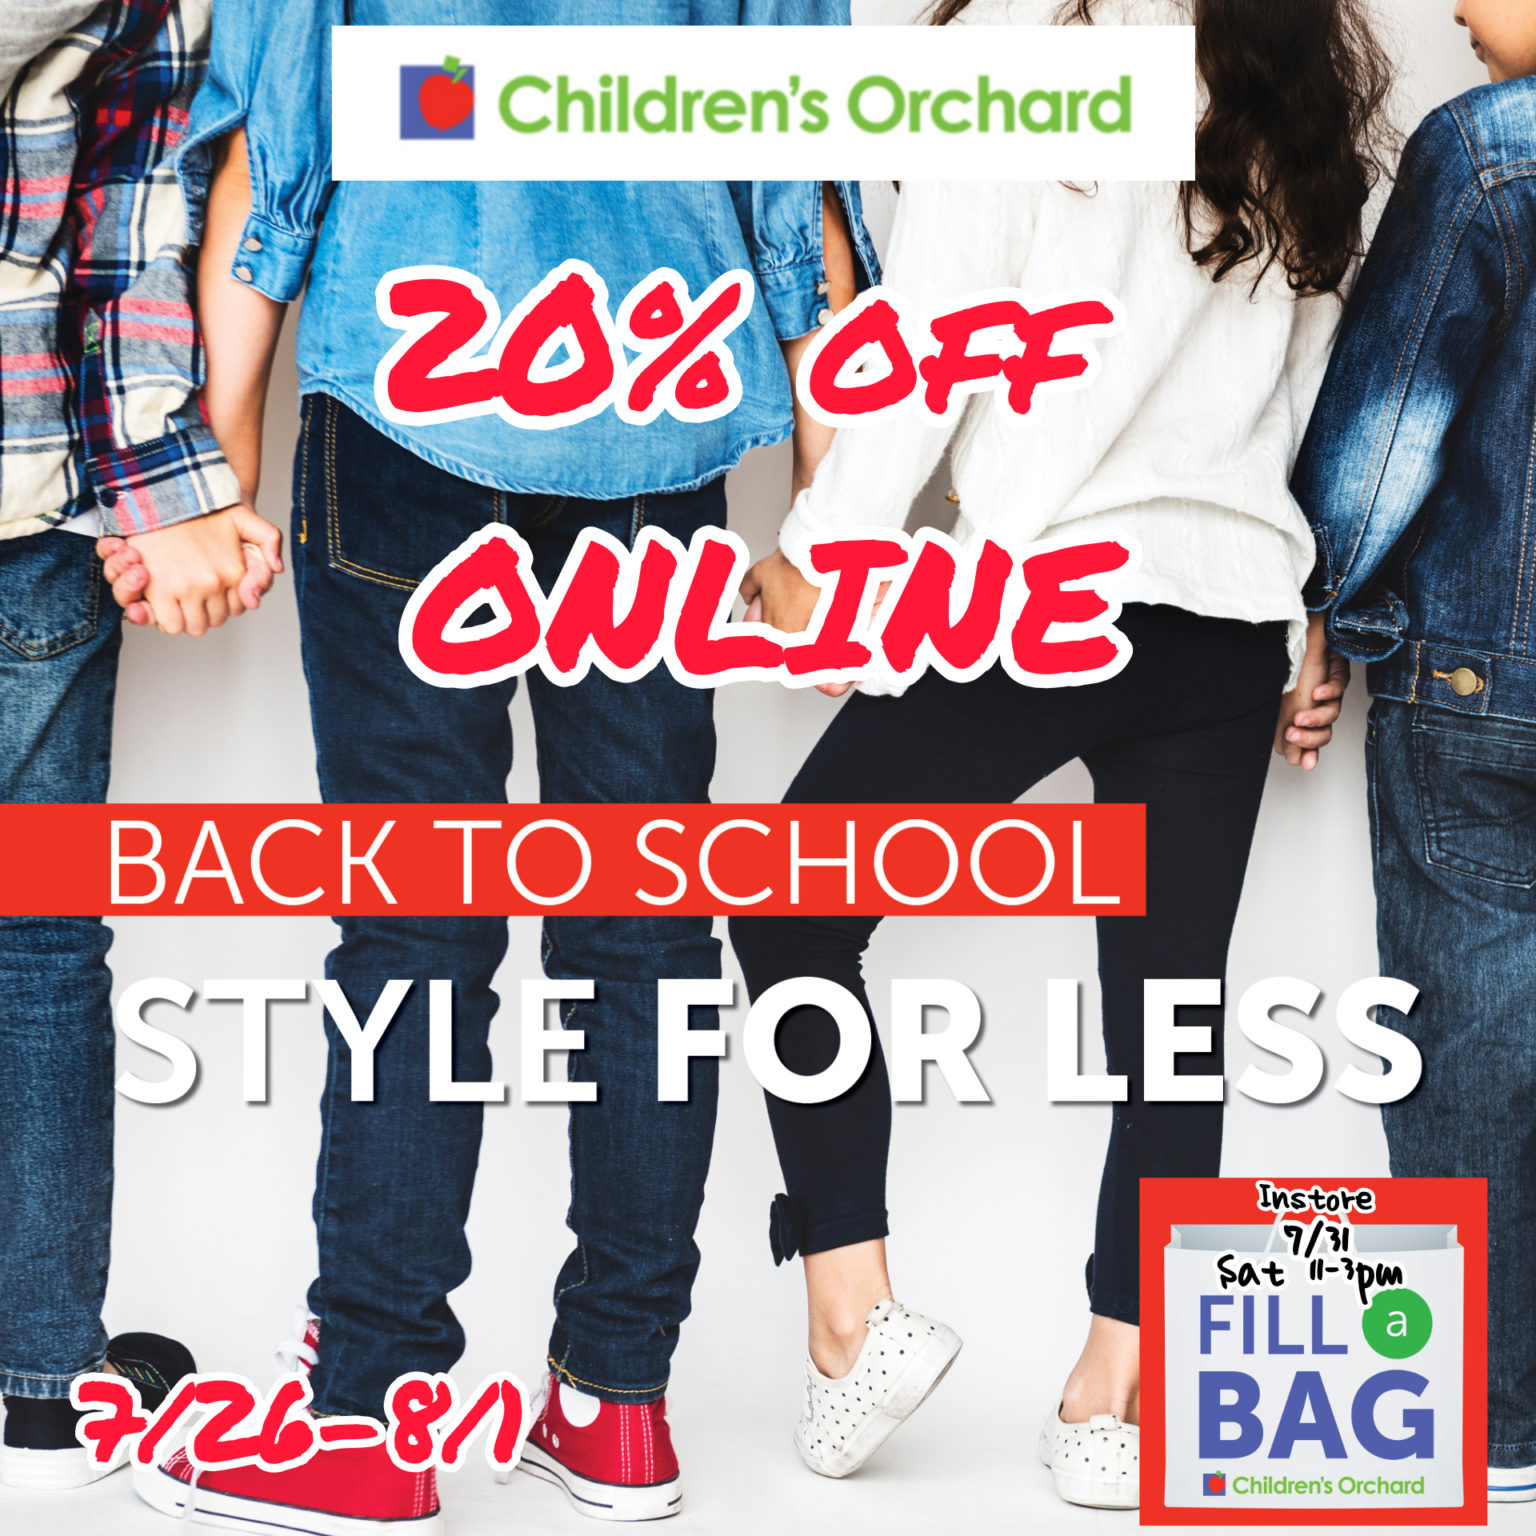 Back to school: styles for less. 20% off online. Fill a bag: in-store Saturday, July 31 from 11am to 3pm.